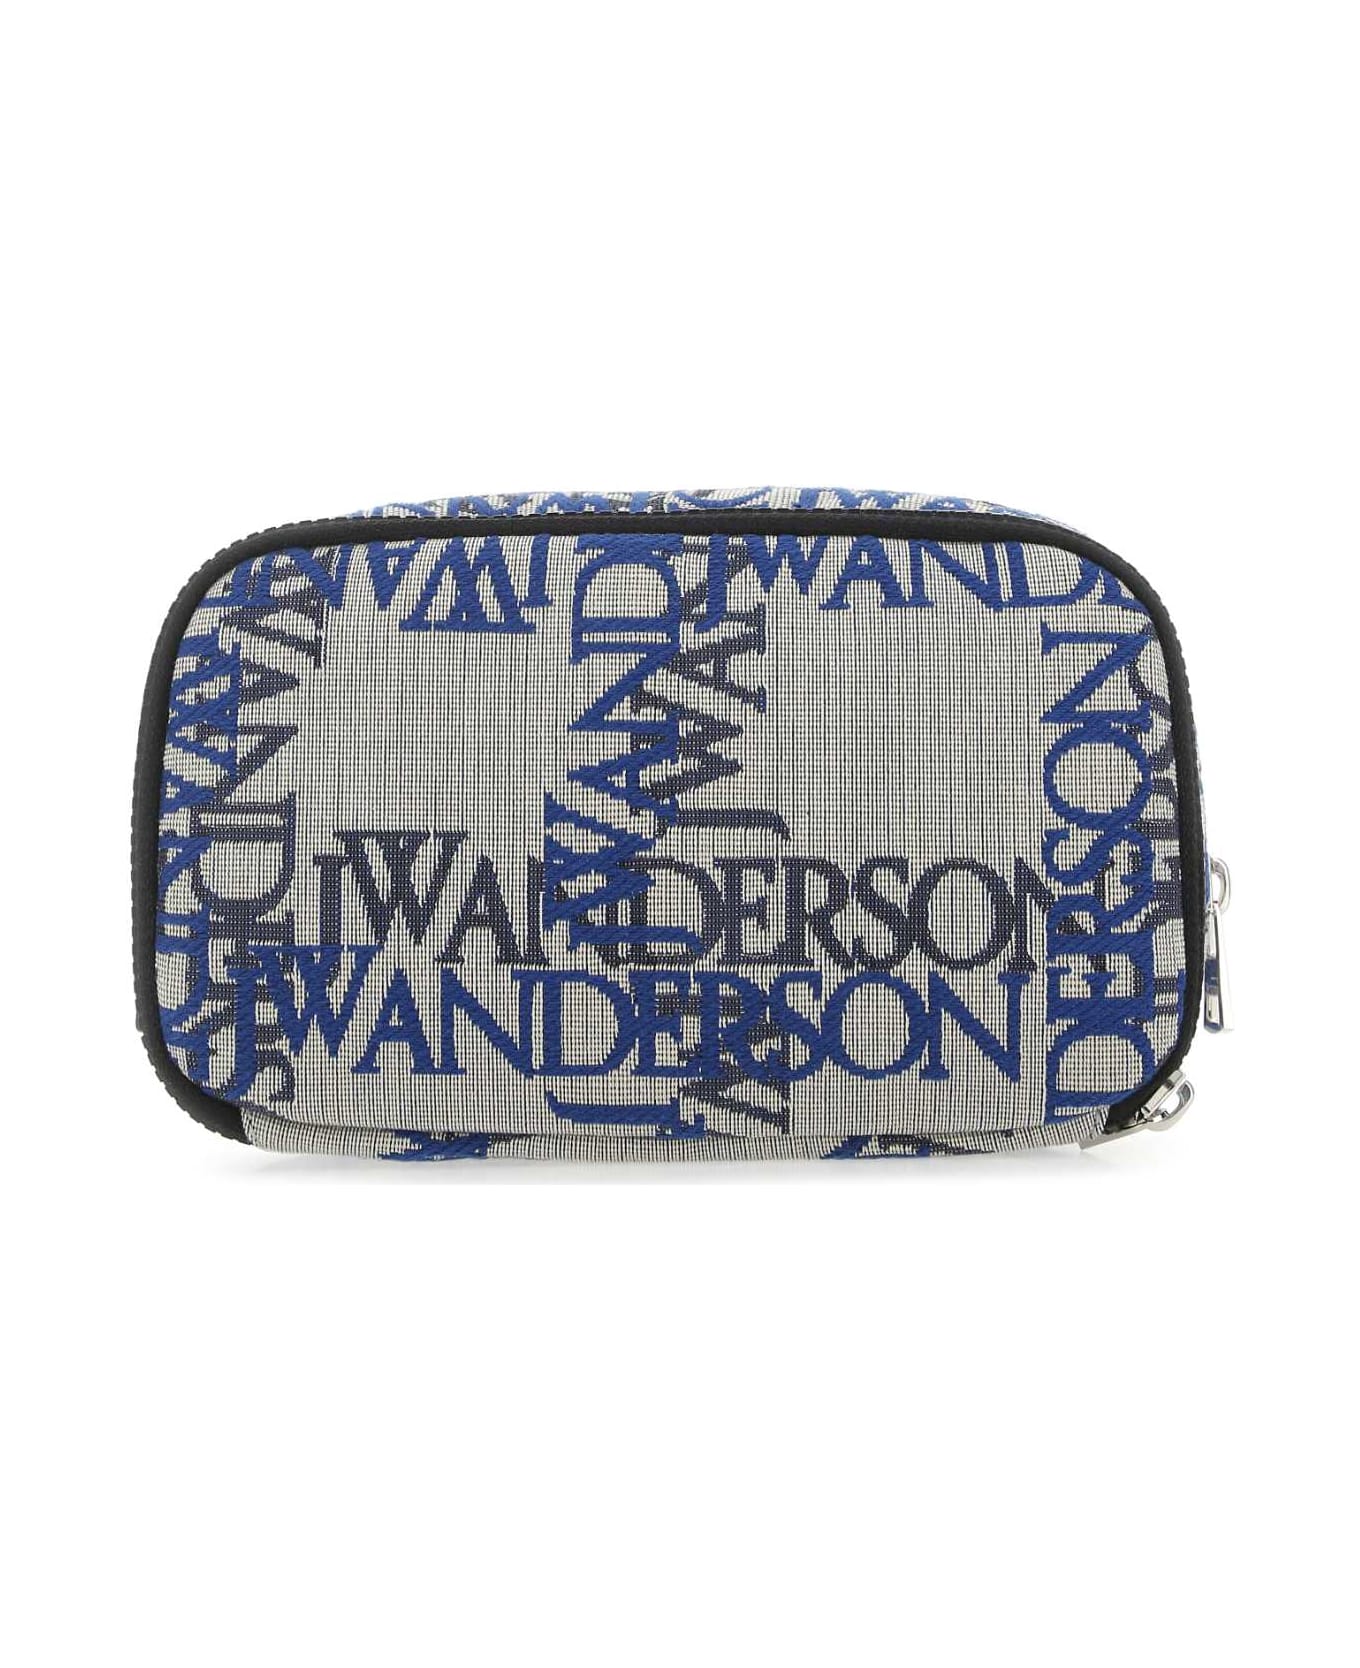 J.W. Anderson Embroidered Fabric Beauty Case - 614 クラッチバッグ